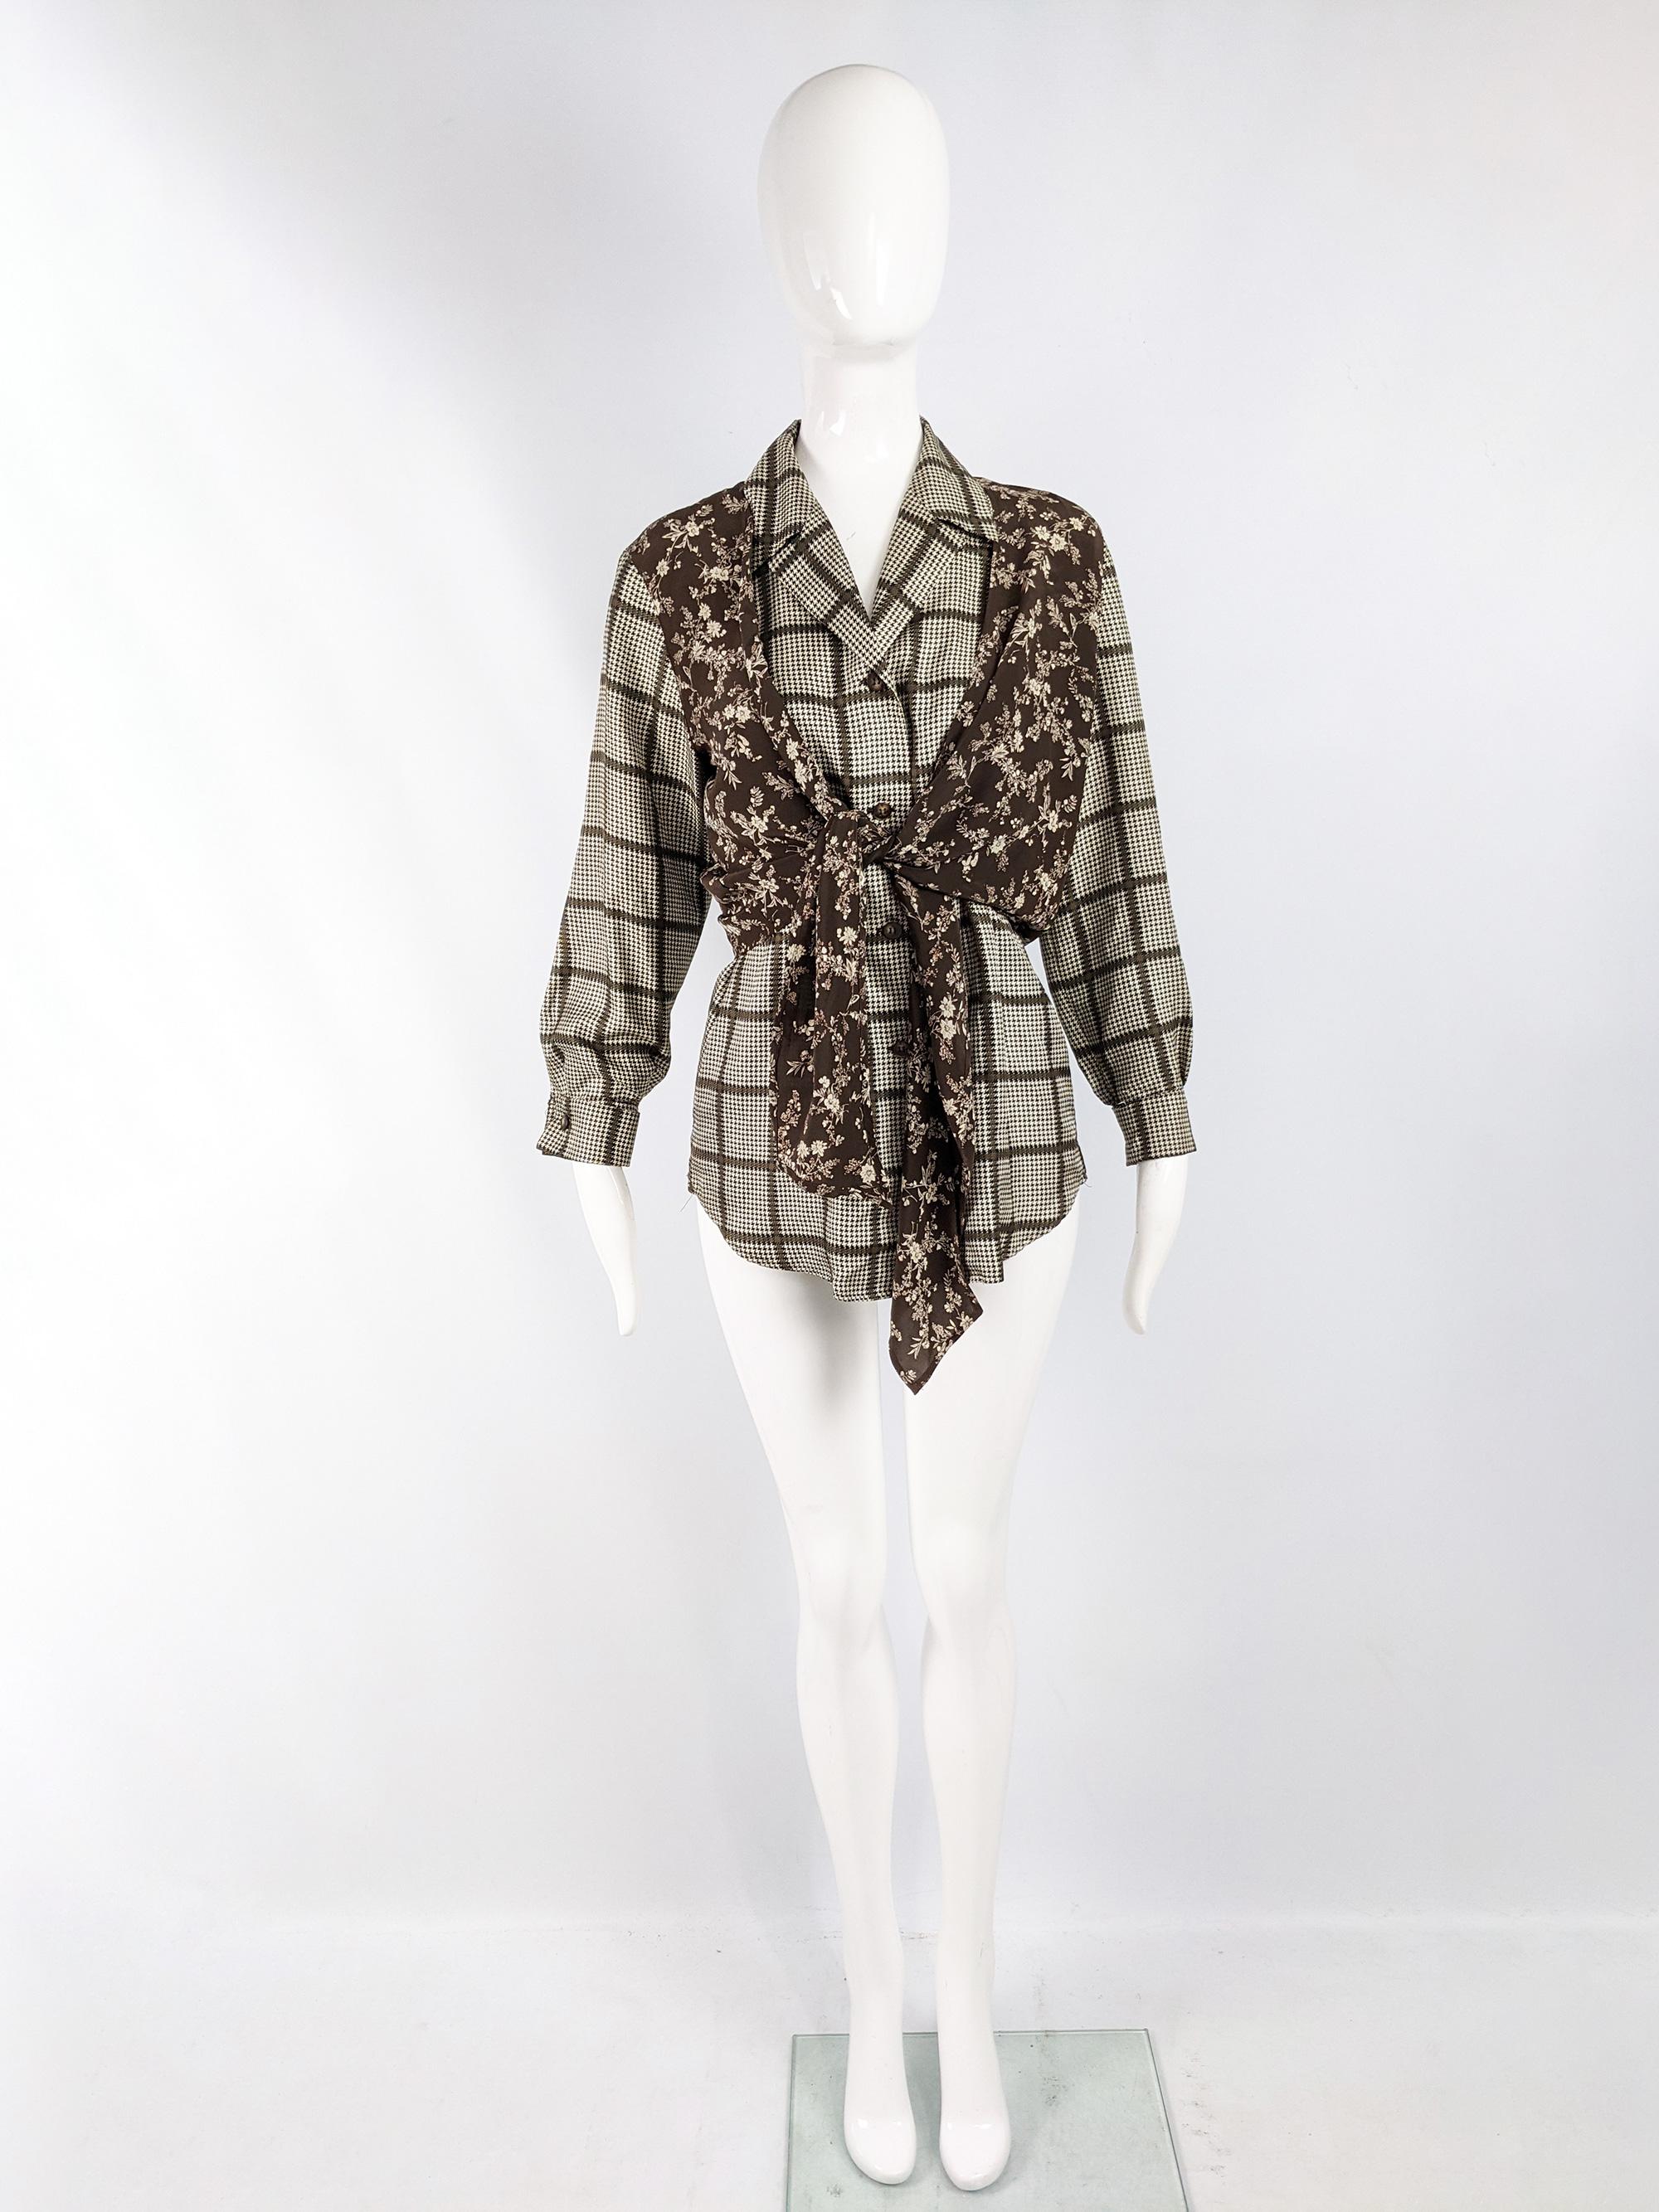 A chic vintage womens long sleeve silk blouse from the 90s by Max Mara for the Sportmax line. In a pure silk checked fabric with a floral over layer that can be tied in the front. 

Size: Unlabelled; fits like a modern womens UK 12-14/ US 8-10.